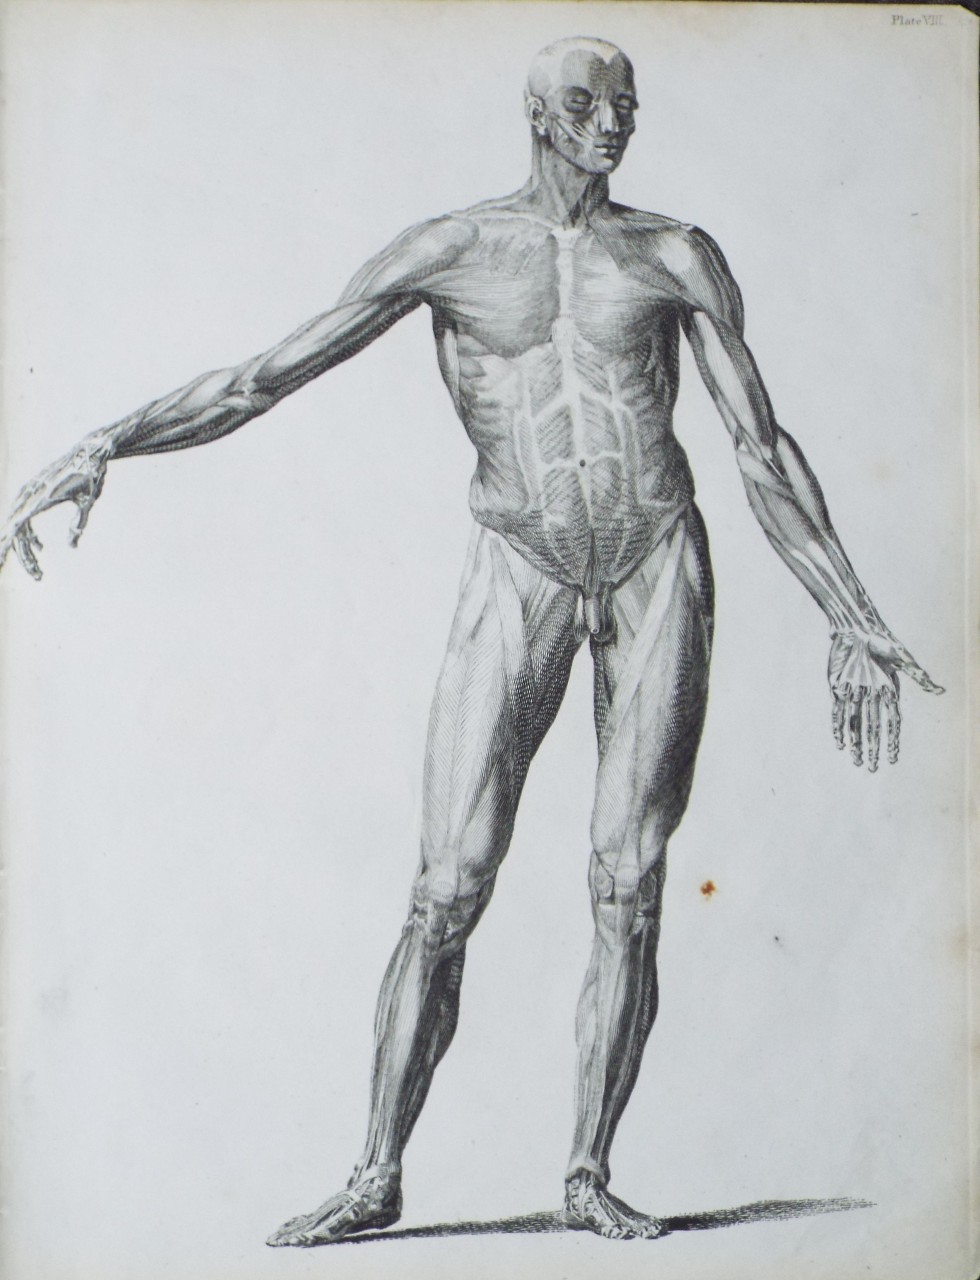 Print - (Human figure front view showing musculature)